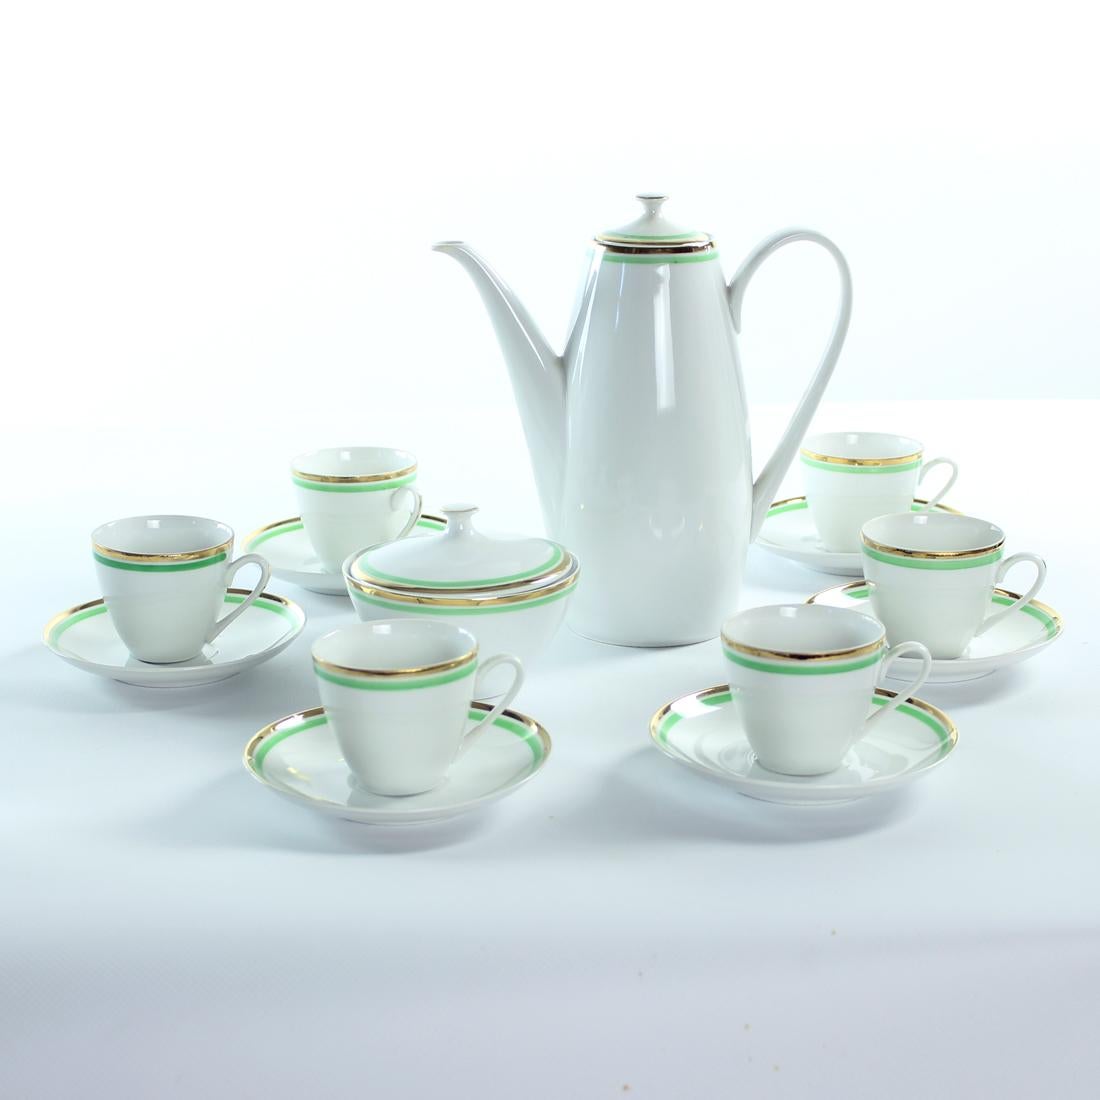 Beautiful mid-century porcelain set for tea or coffee serving. Original porcelain made in Czechoslovakia in 1954. The set is stamped with original stamp on each piece by Bohemia porcelain manufacturer Nova Role. Original design. White porcelain with